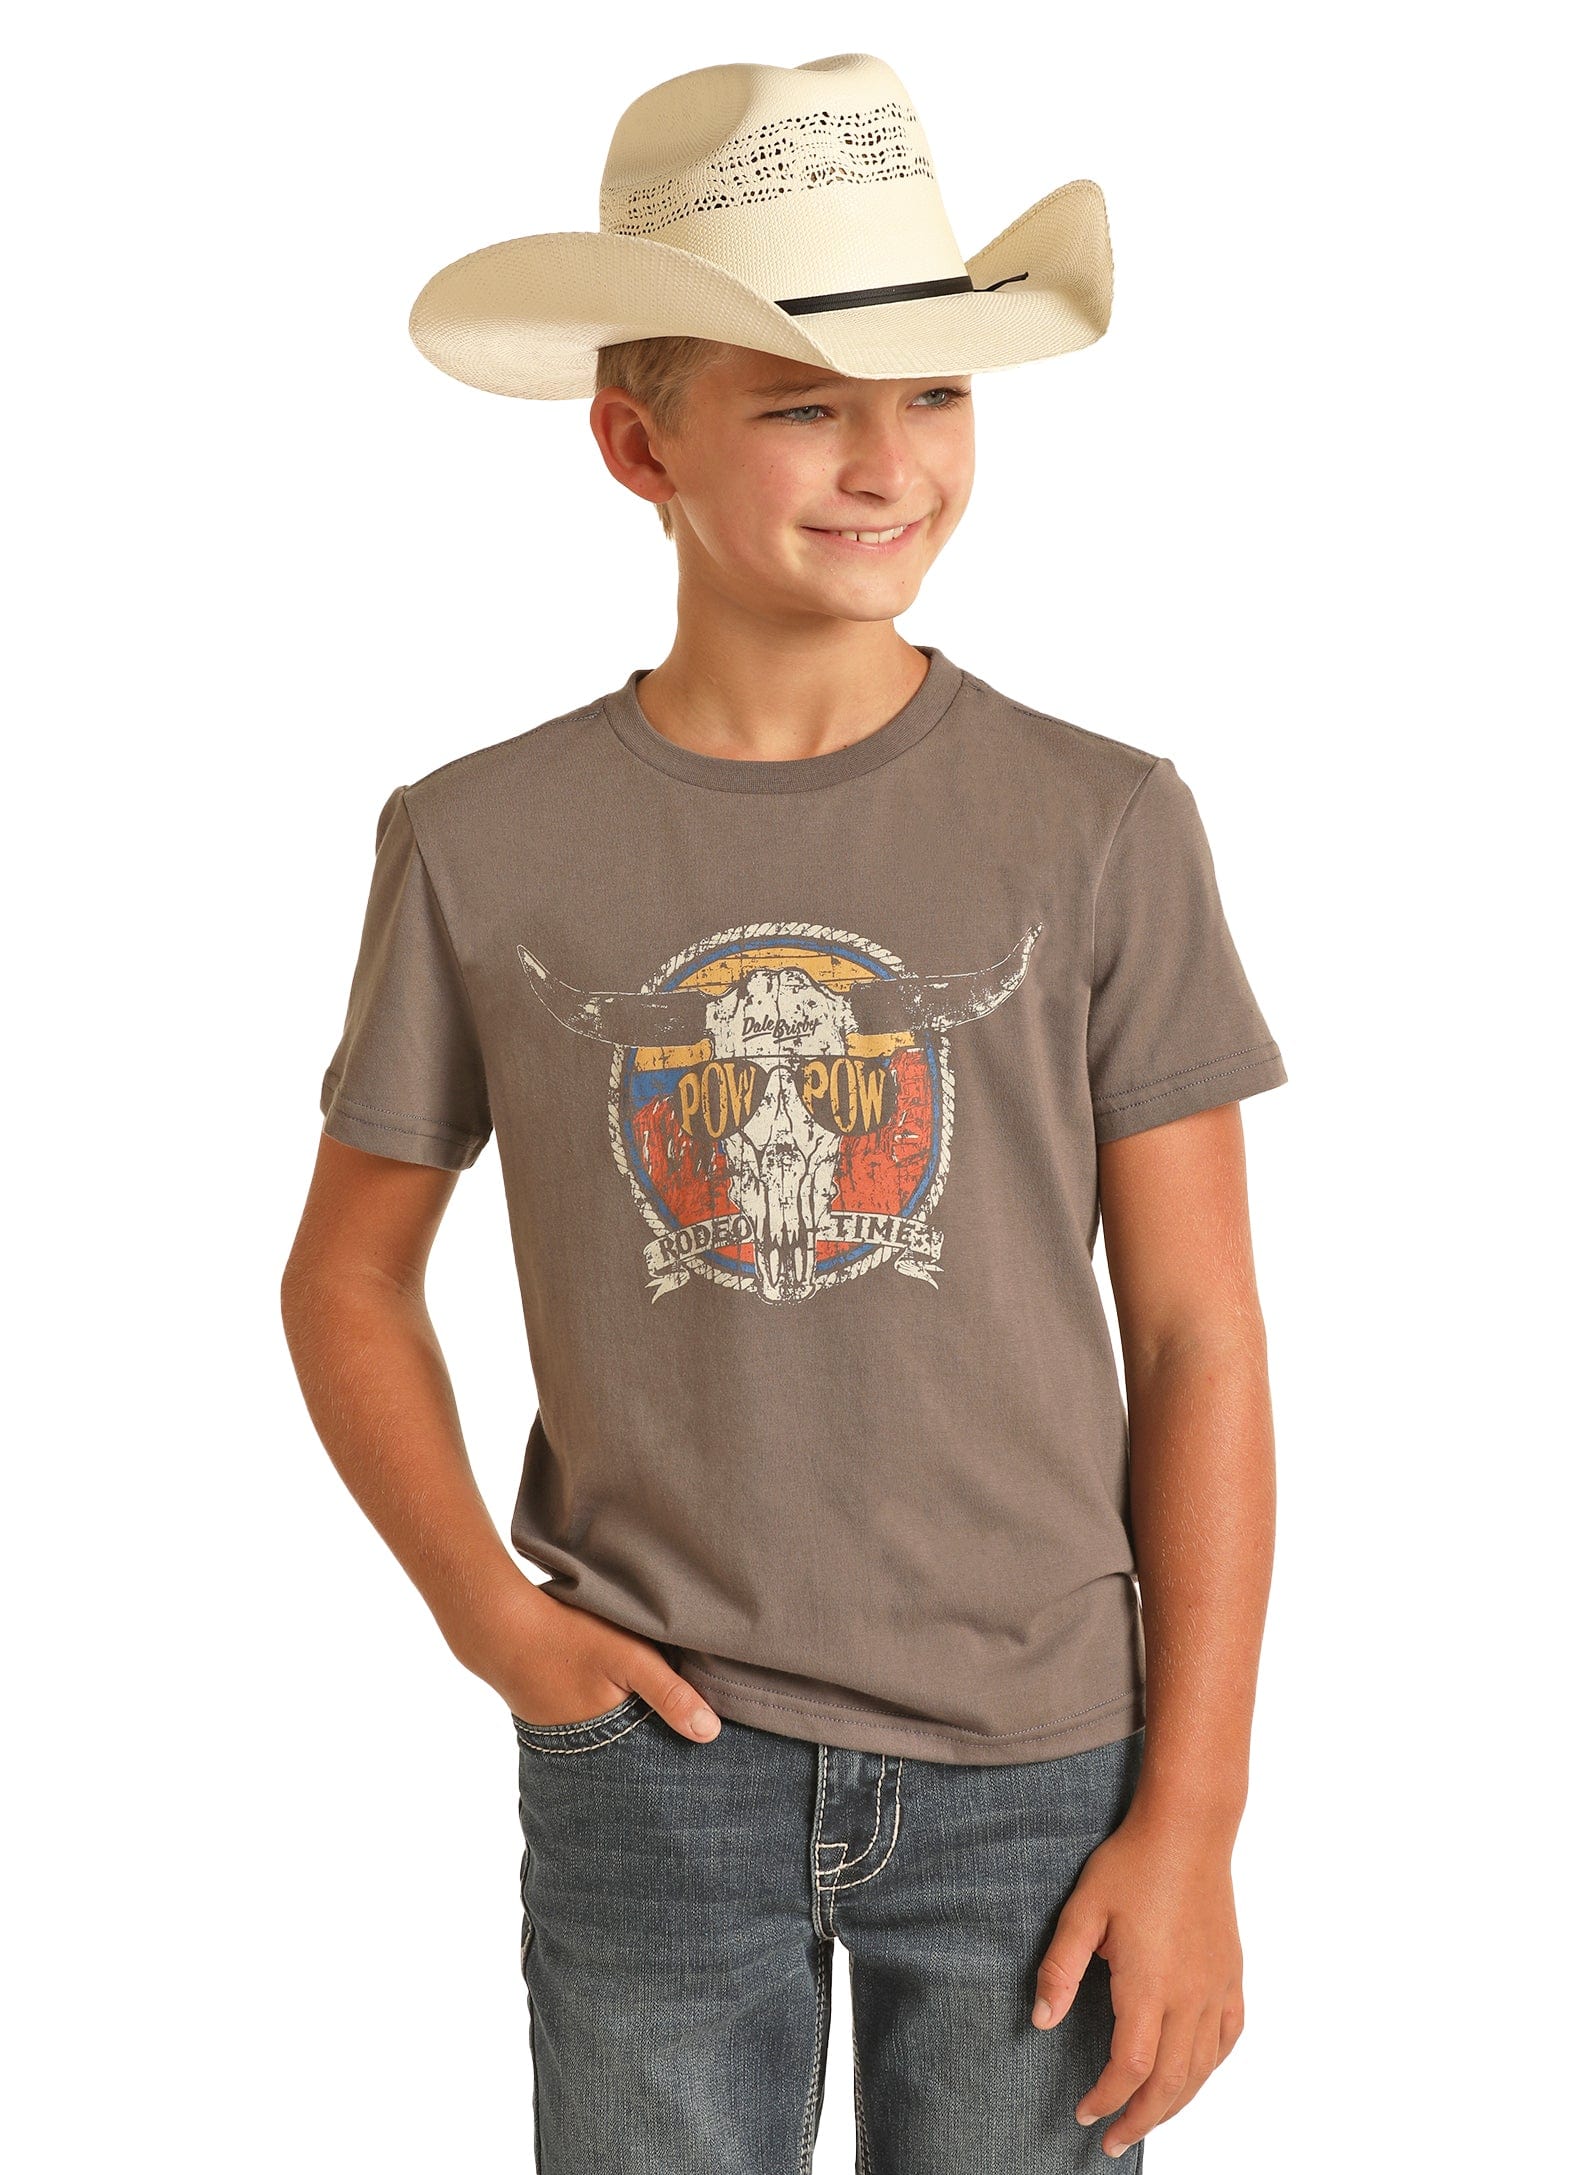 Boys' Clothes, T-Shirts, Jeans & More